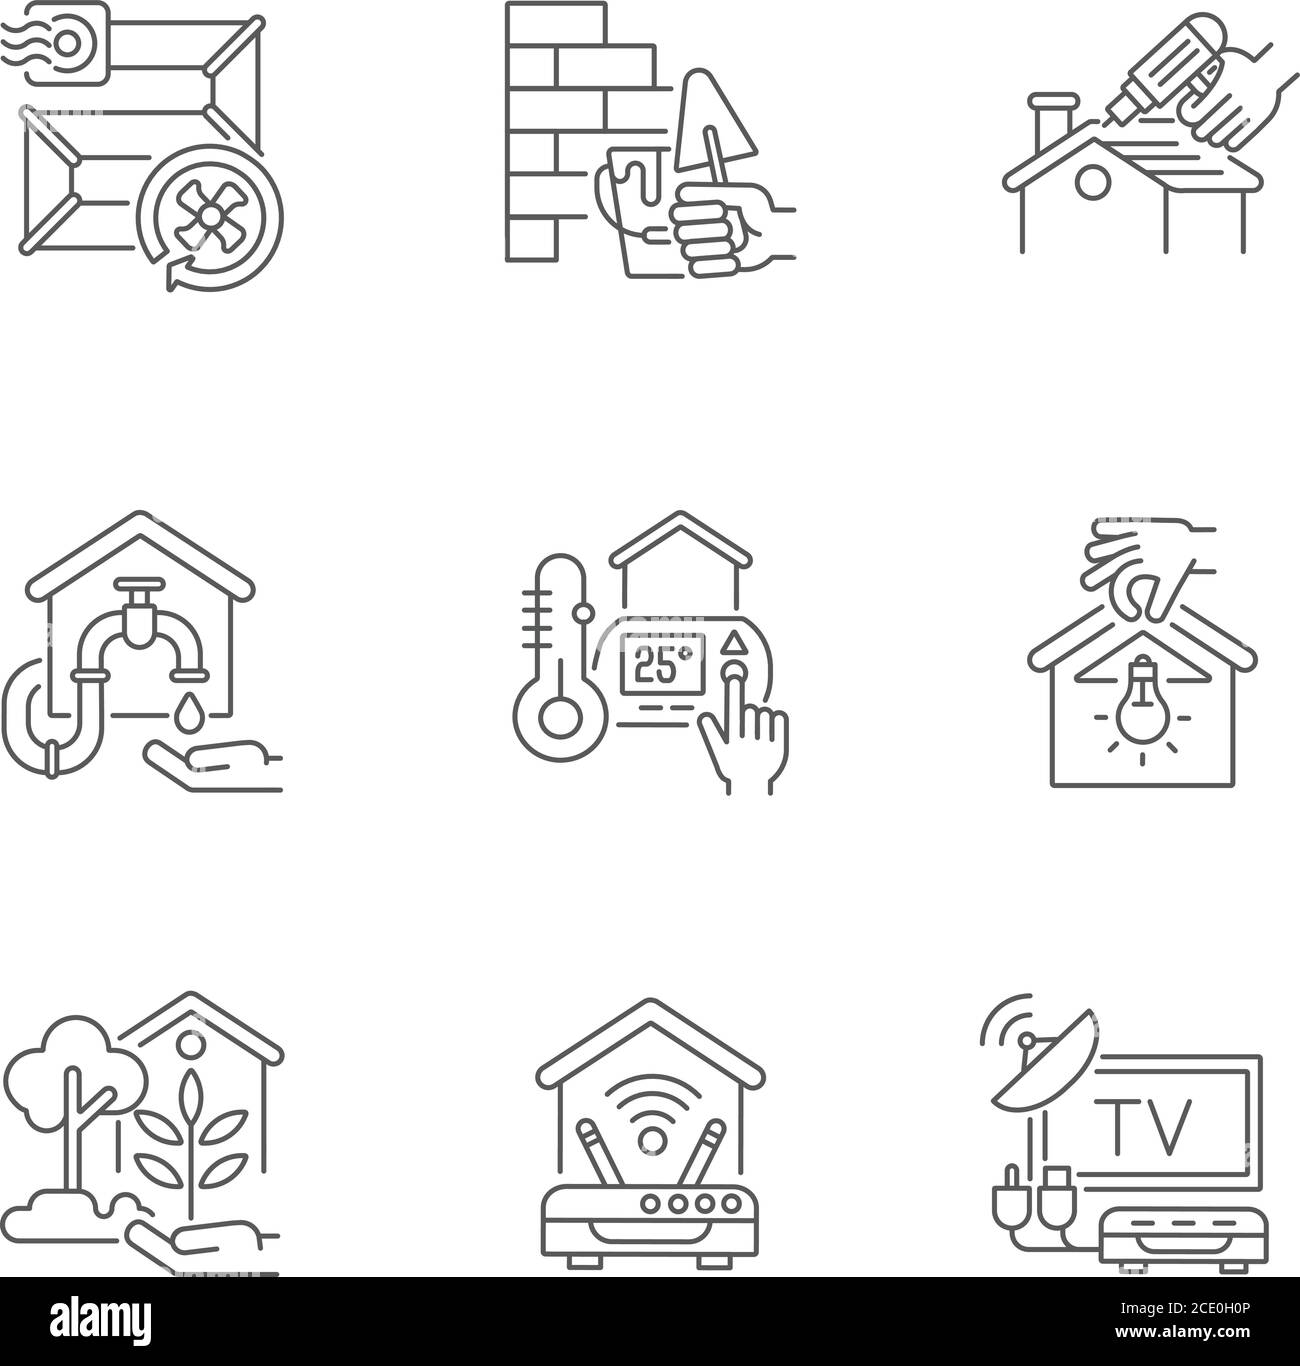 House improvements linear icons set Stock Vector